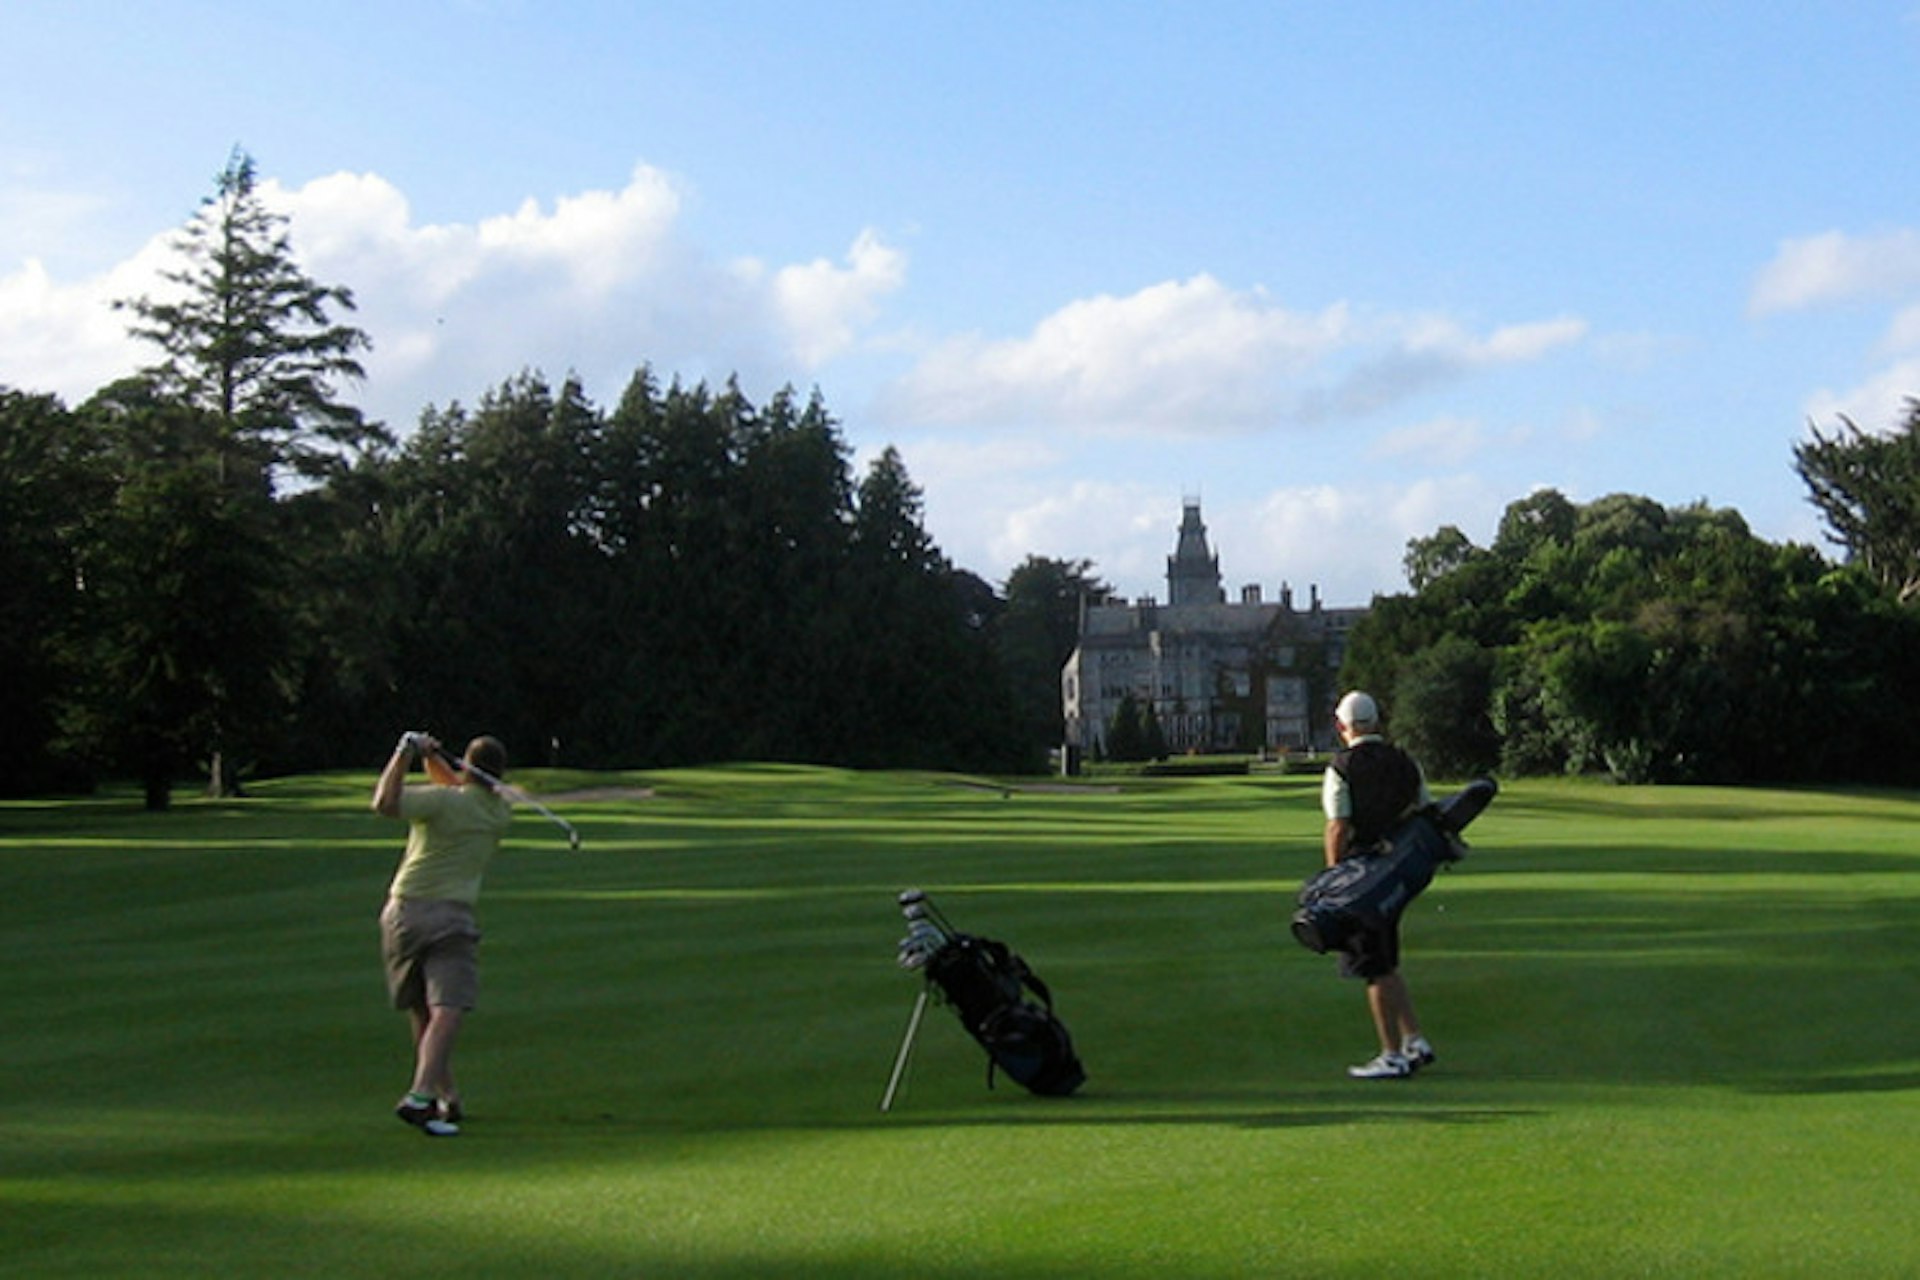 Ireland's golf courses have international appeal. Image by bhenak / CC BY-SA 2.0